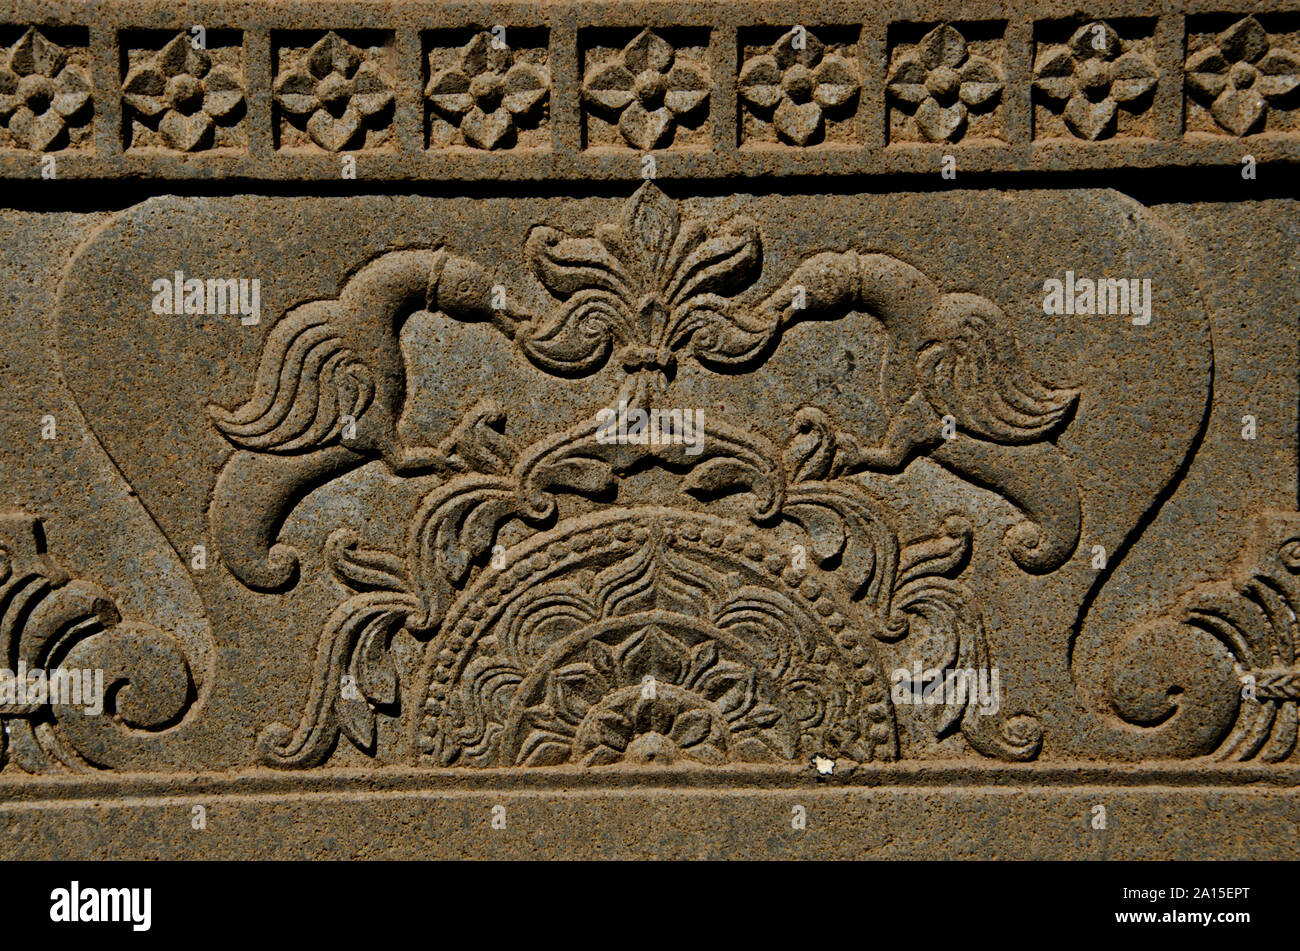 Carving details on the outer wall of the Vitthal Rukhmini Temple at Palashi, Parner, Maharashtra, India Stock Photo